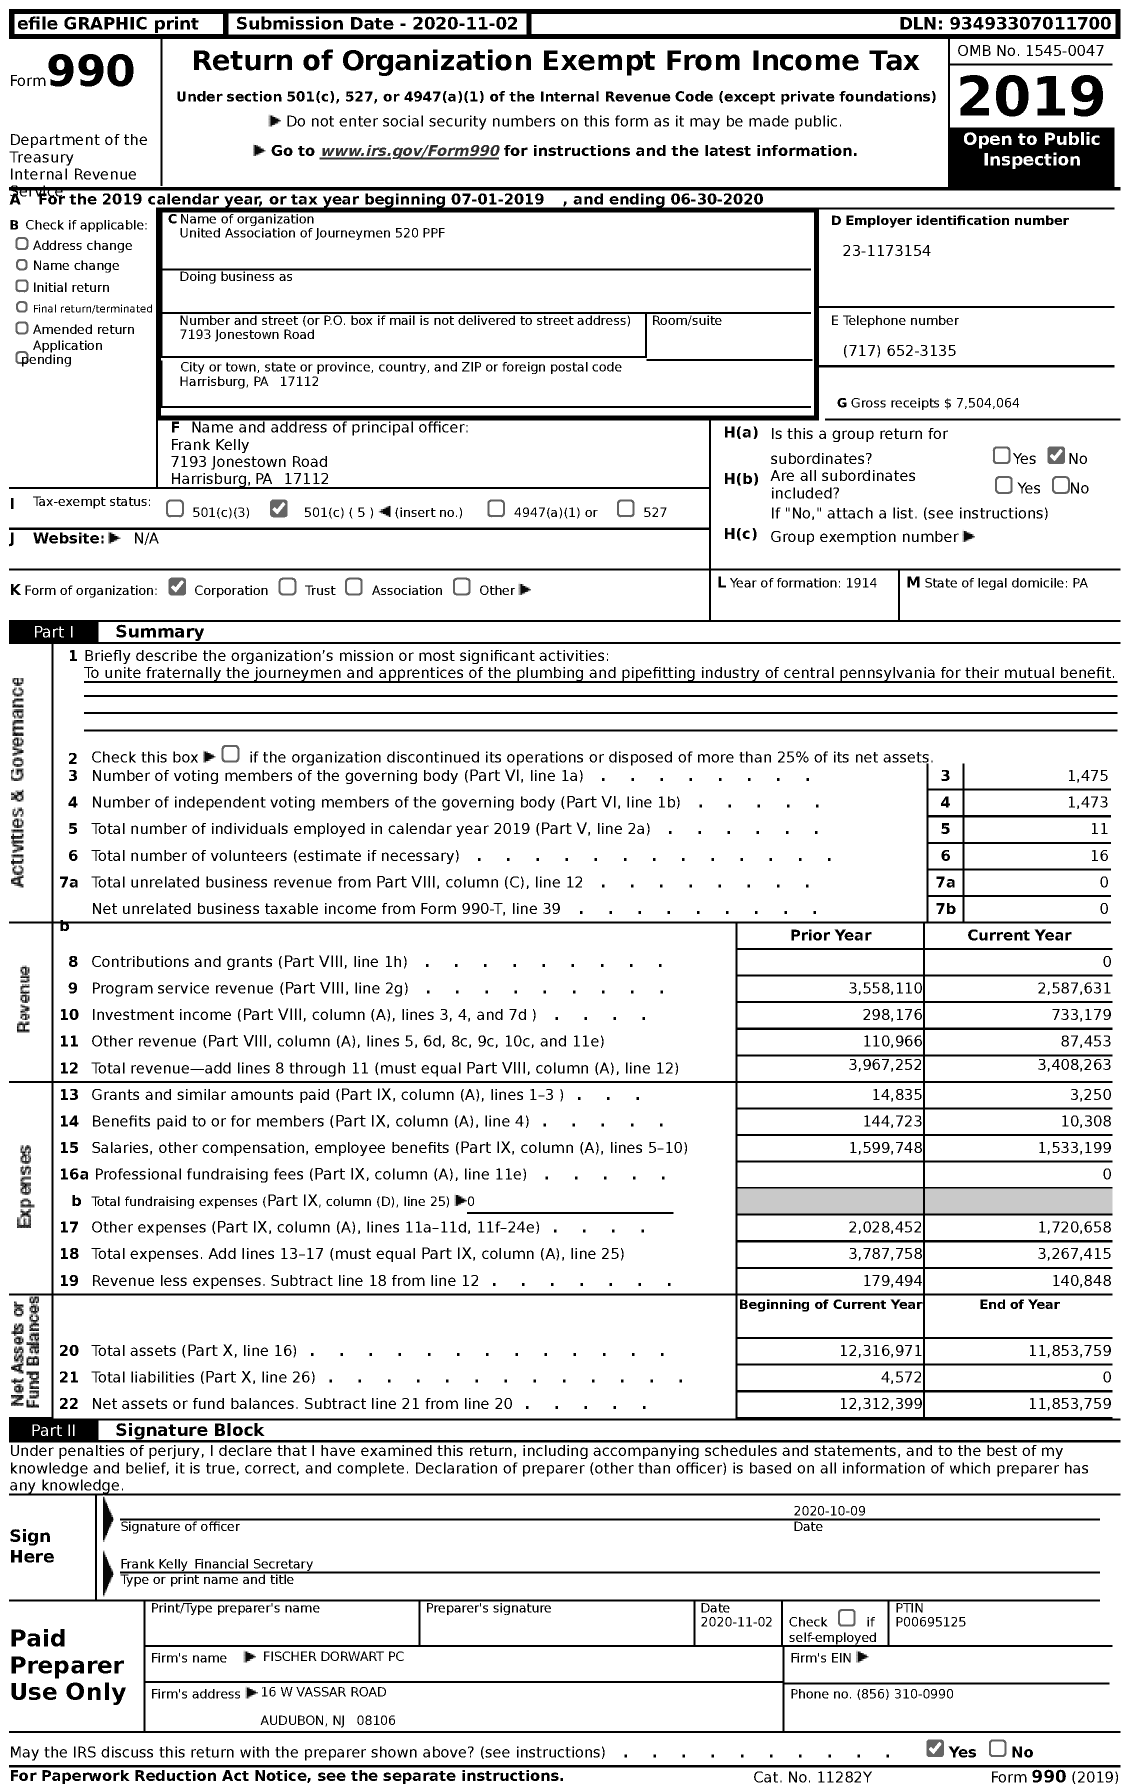 Image of first page of 2019 Form 990 for United Association - 520 PPF